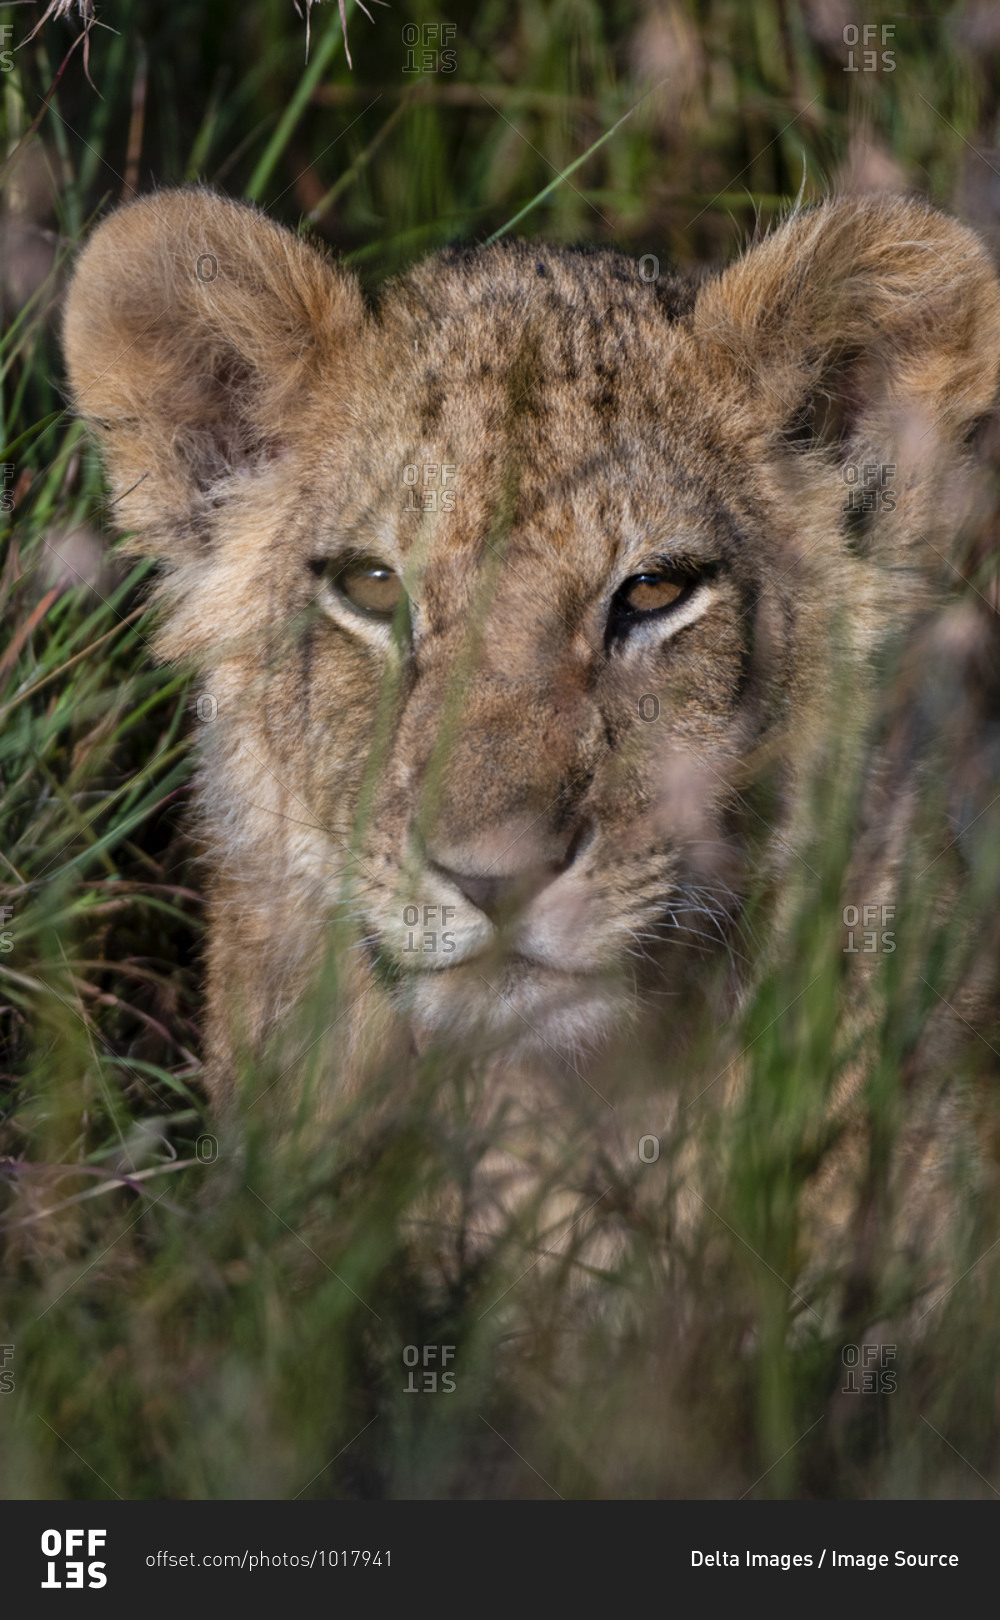 Lion cub (Panthera leo) waiting for its mother and hiding in tall grass, Masai Mara National Reserve, Kenya